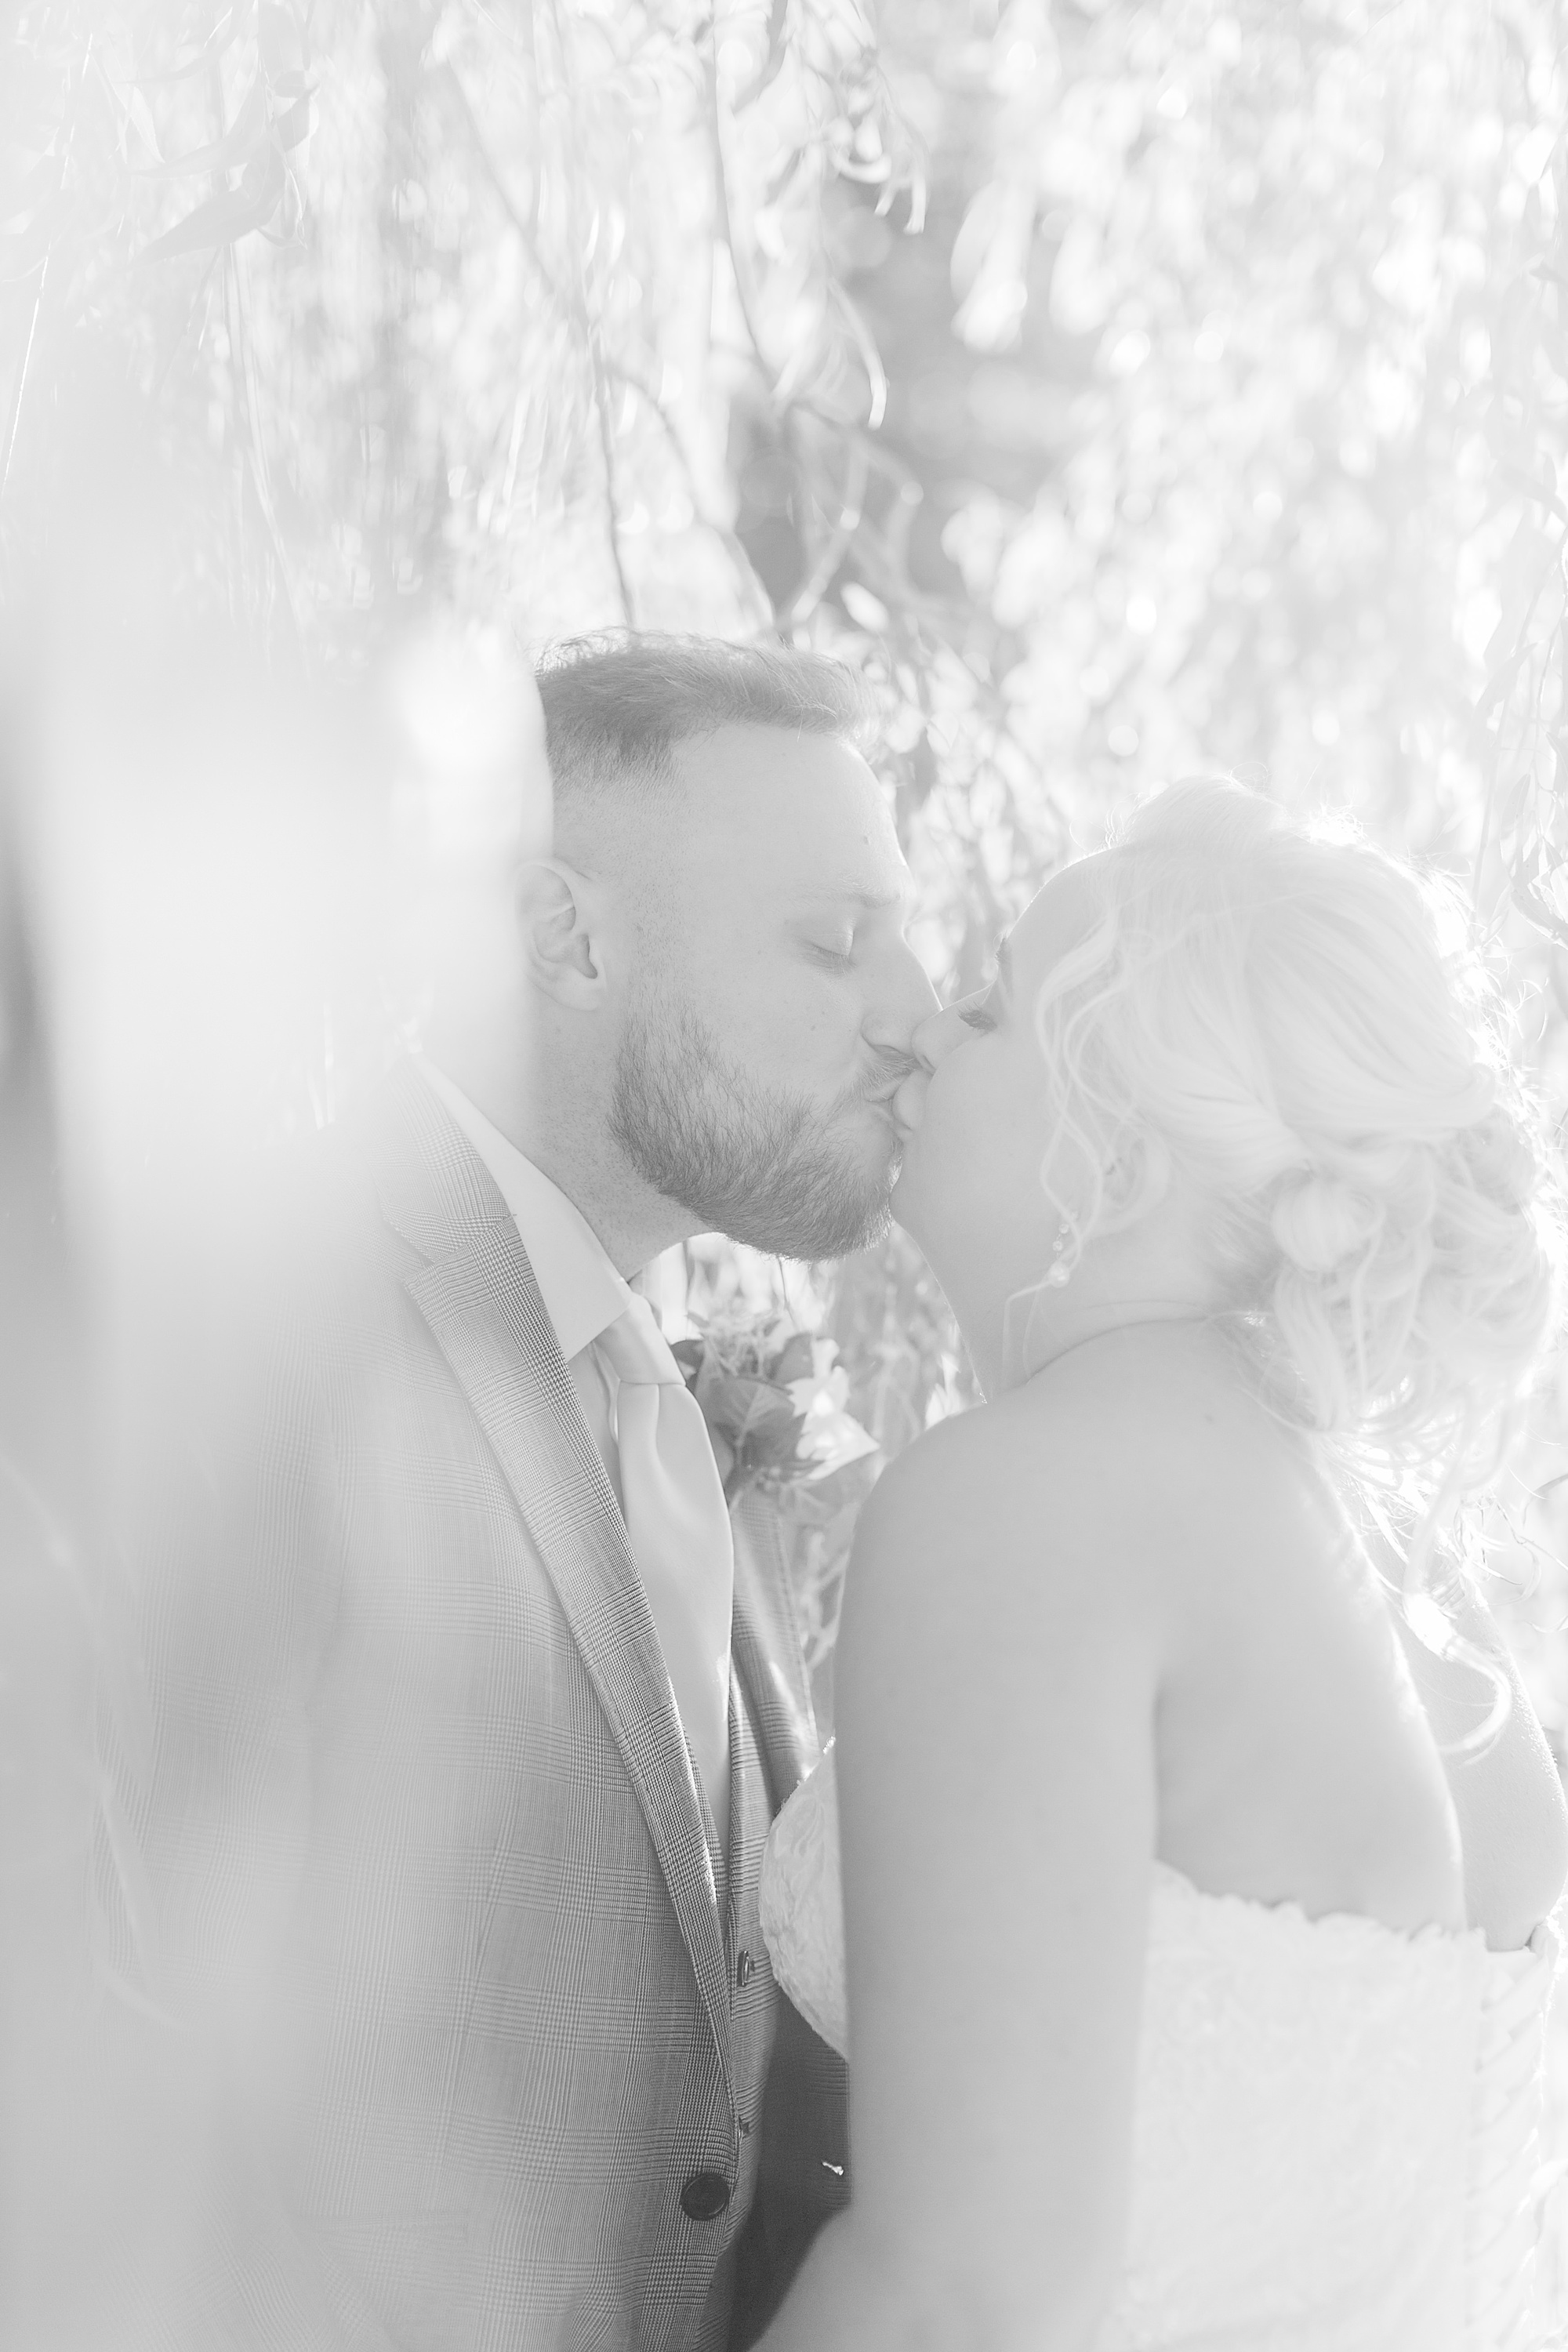 photo is of a bride and groom embraced together and kissing under a willow tree in hazy setting sunlight